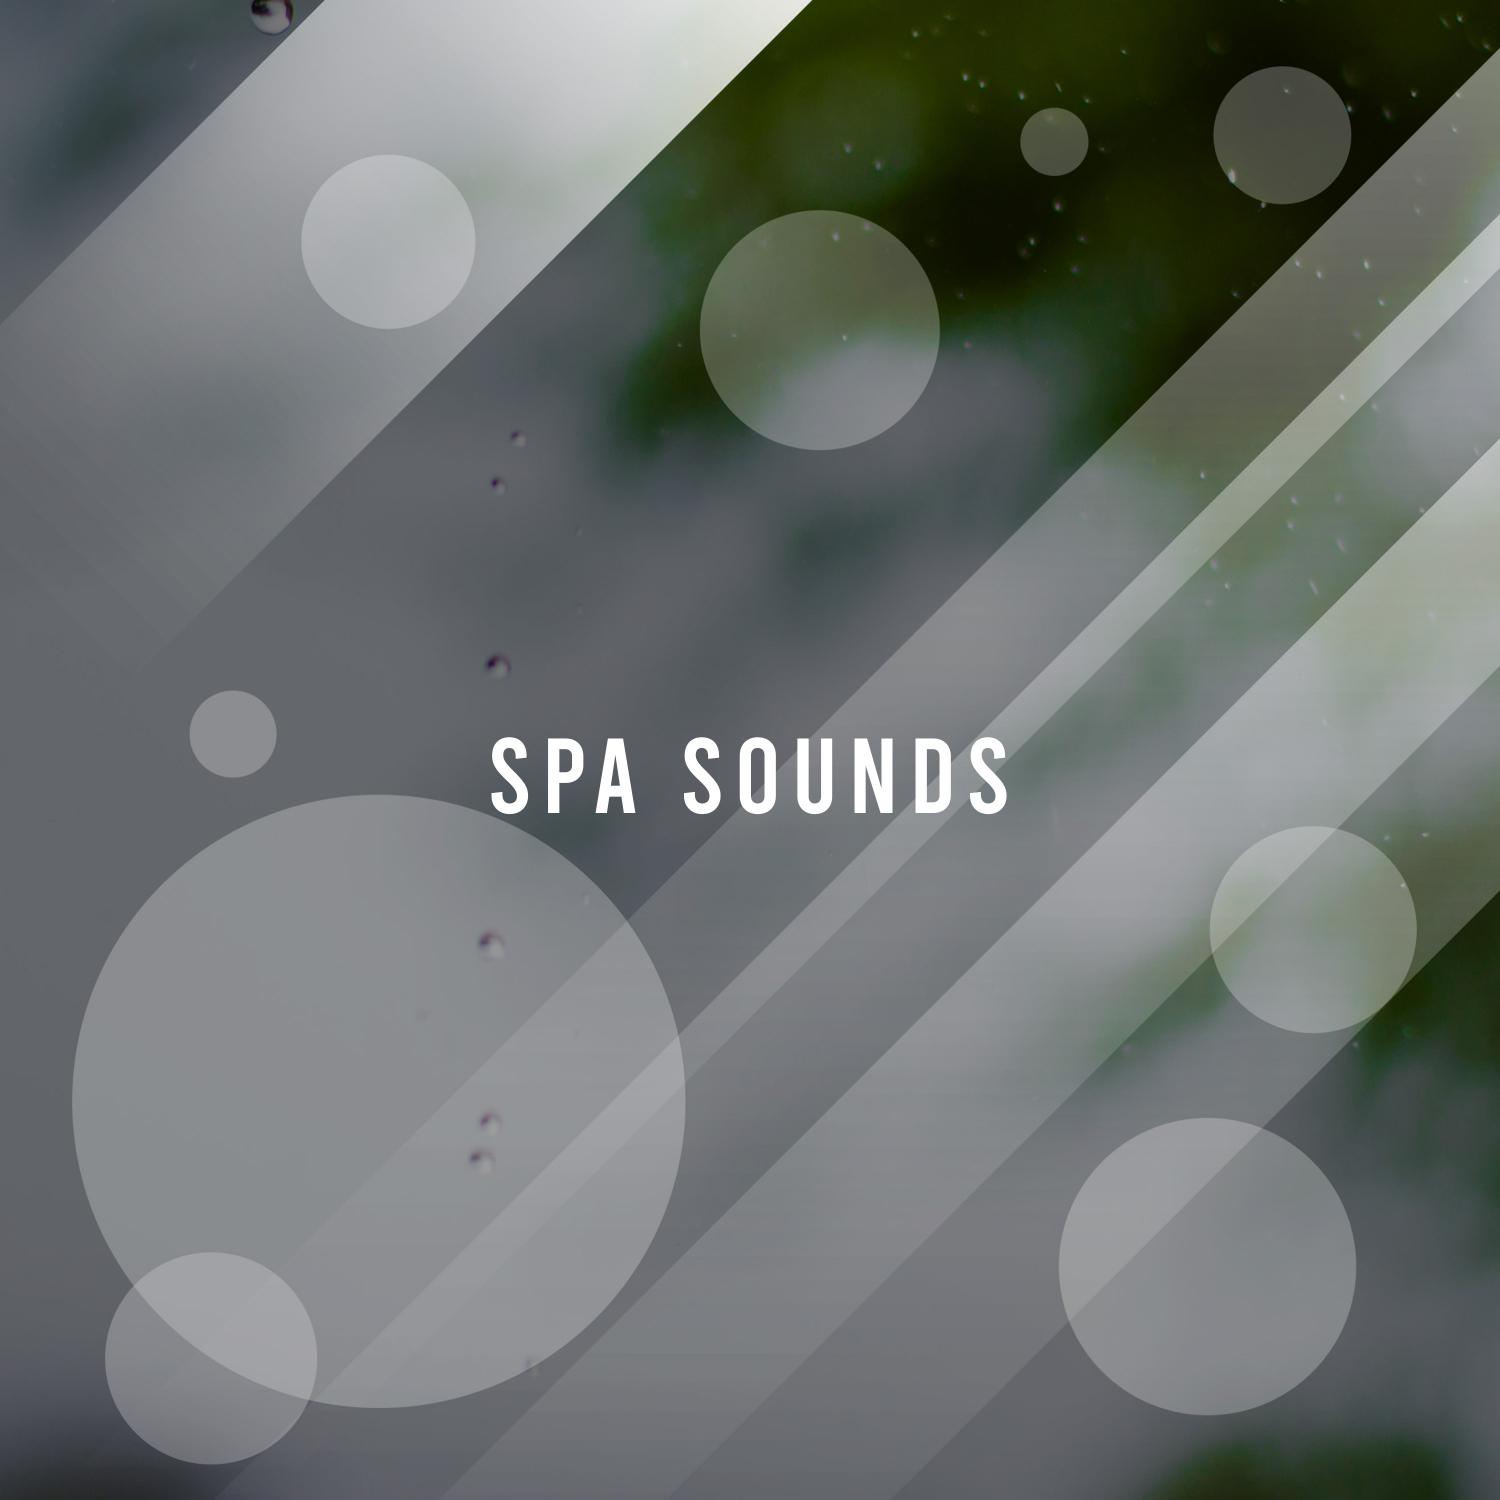 10 Spa Sounds - Loopable without Fades - Nature and Rain Sounds